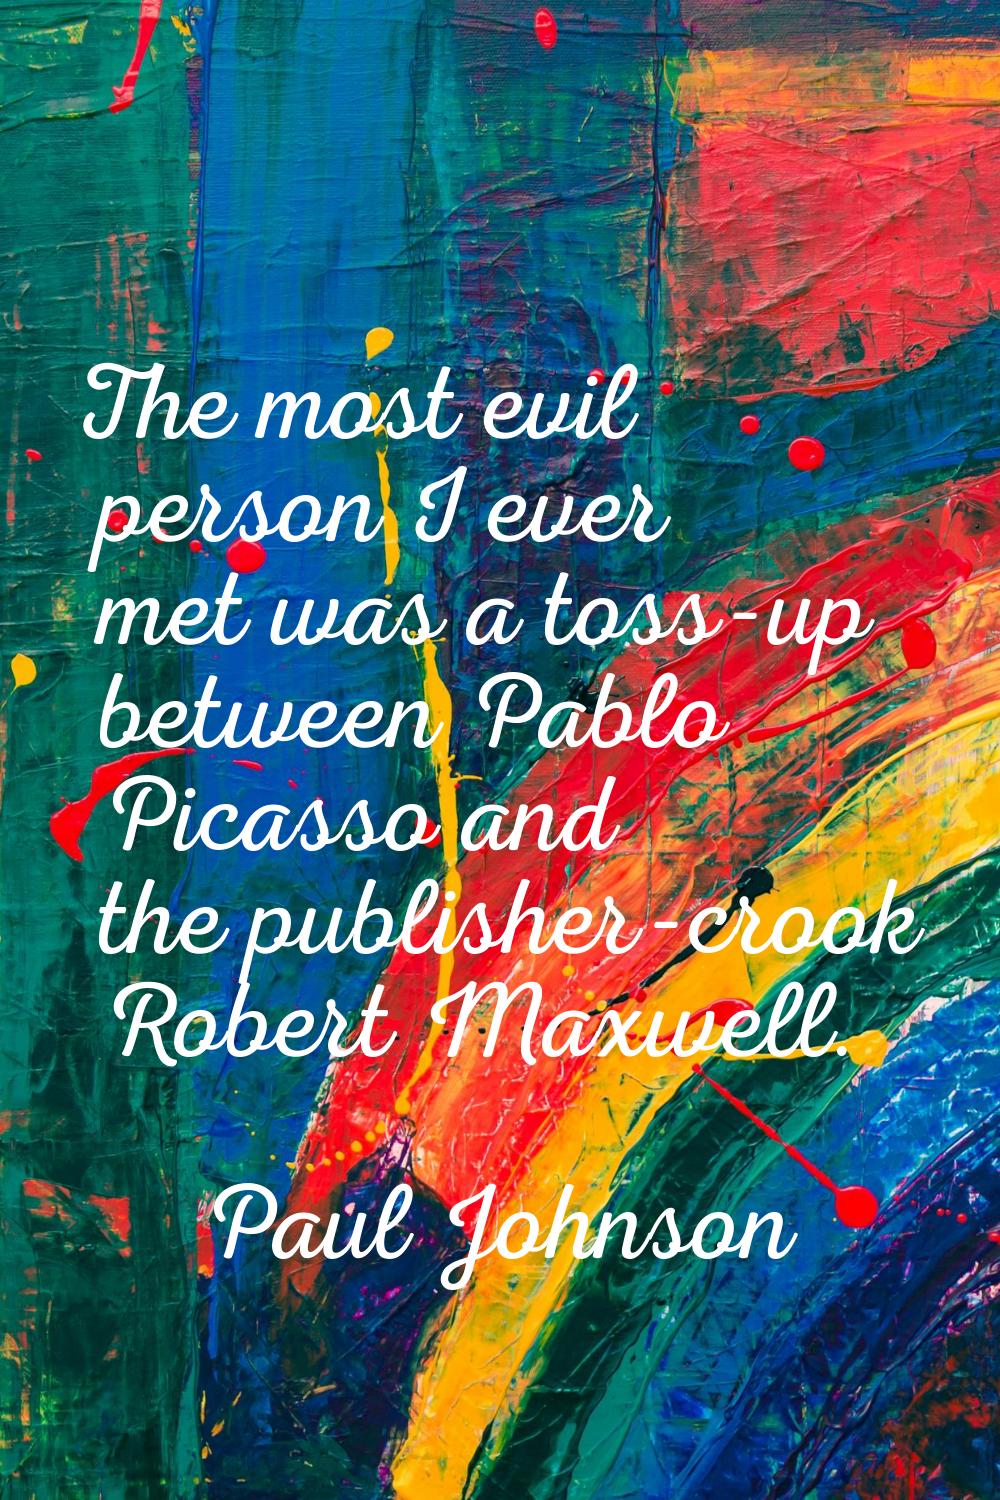 The most evil person I ever met was a toss-up between Pablo Picasso and the publisher-crook Robert 